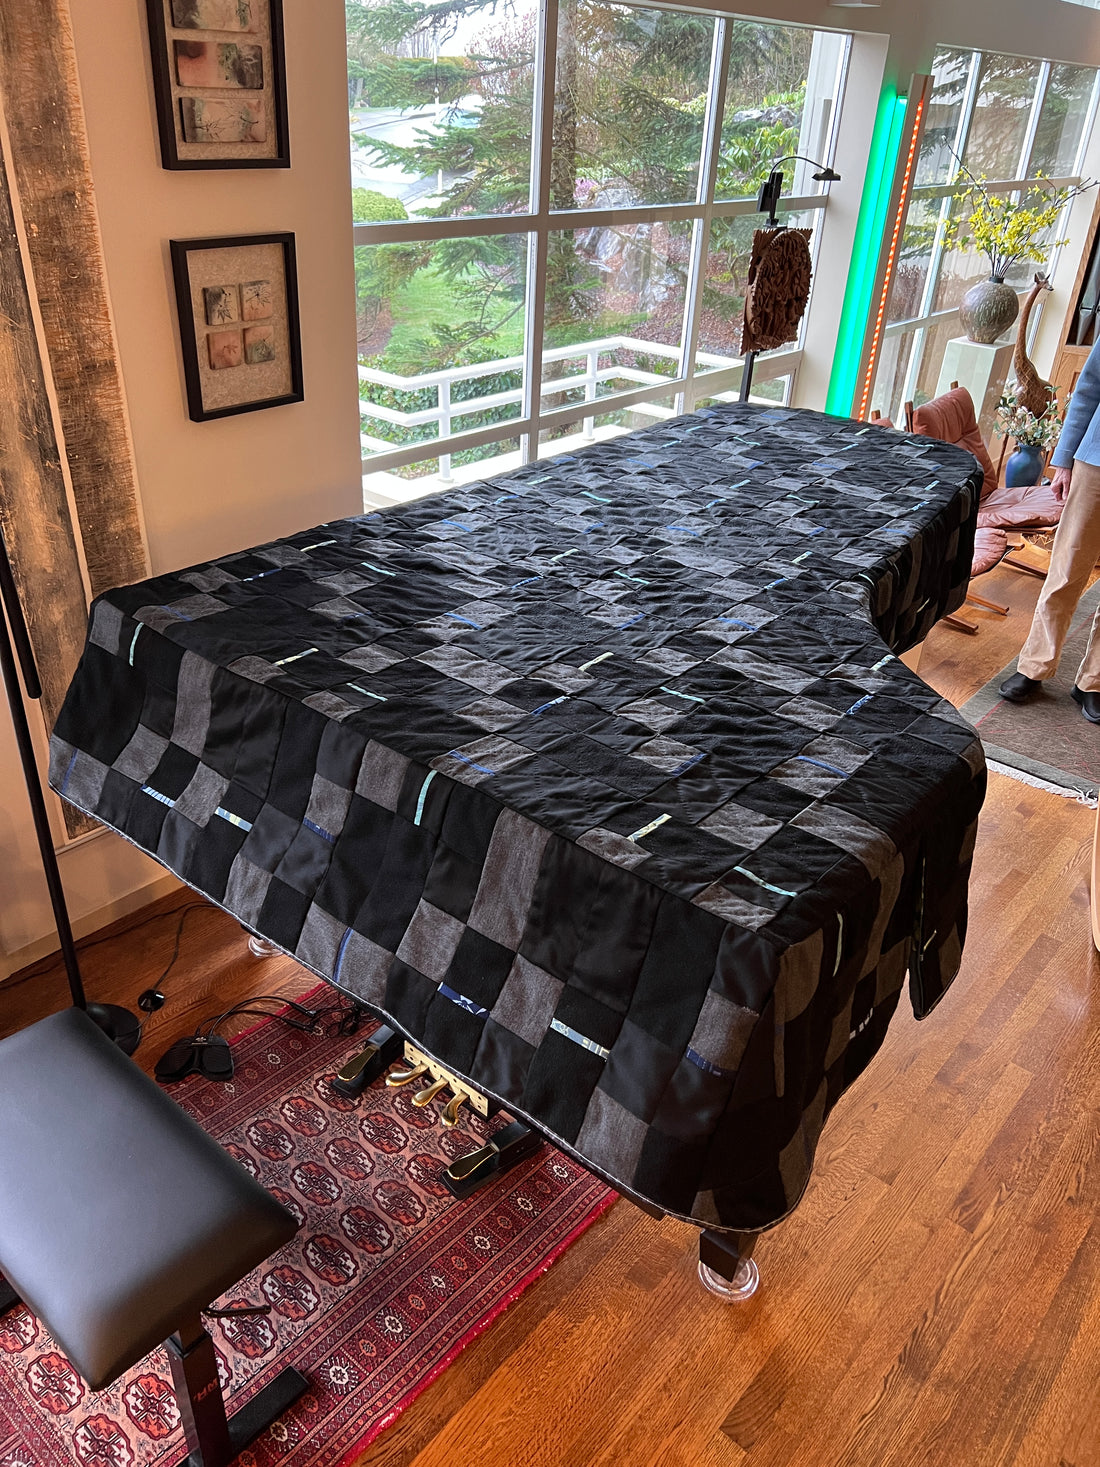 Making a Quilted Piano Cover